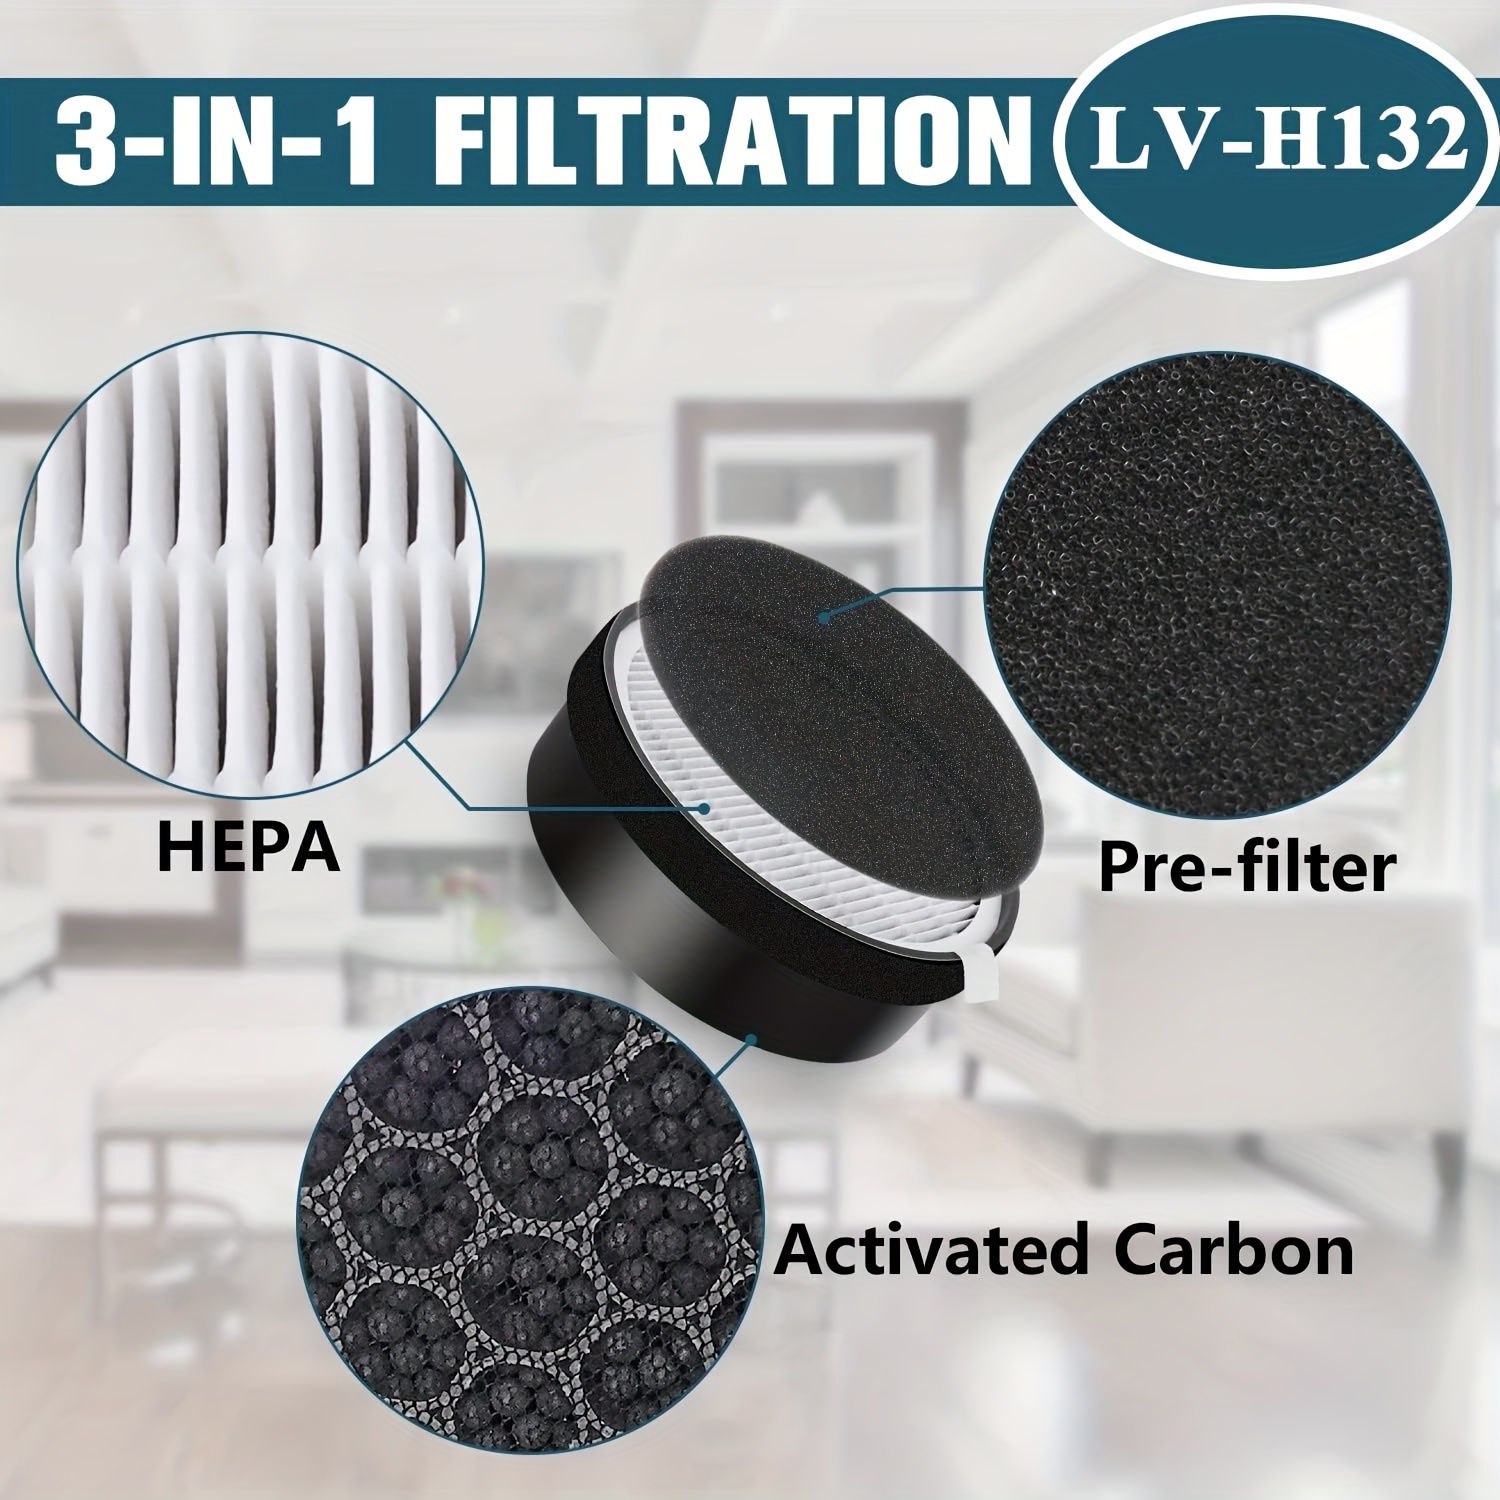 LV-H132 Replacement Filter for LEVOIT Air Purifier Replacement Filter  LV-H132-RF, 3-in-1 H13 True HEPA Filter Replacement, 2 Pack